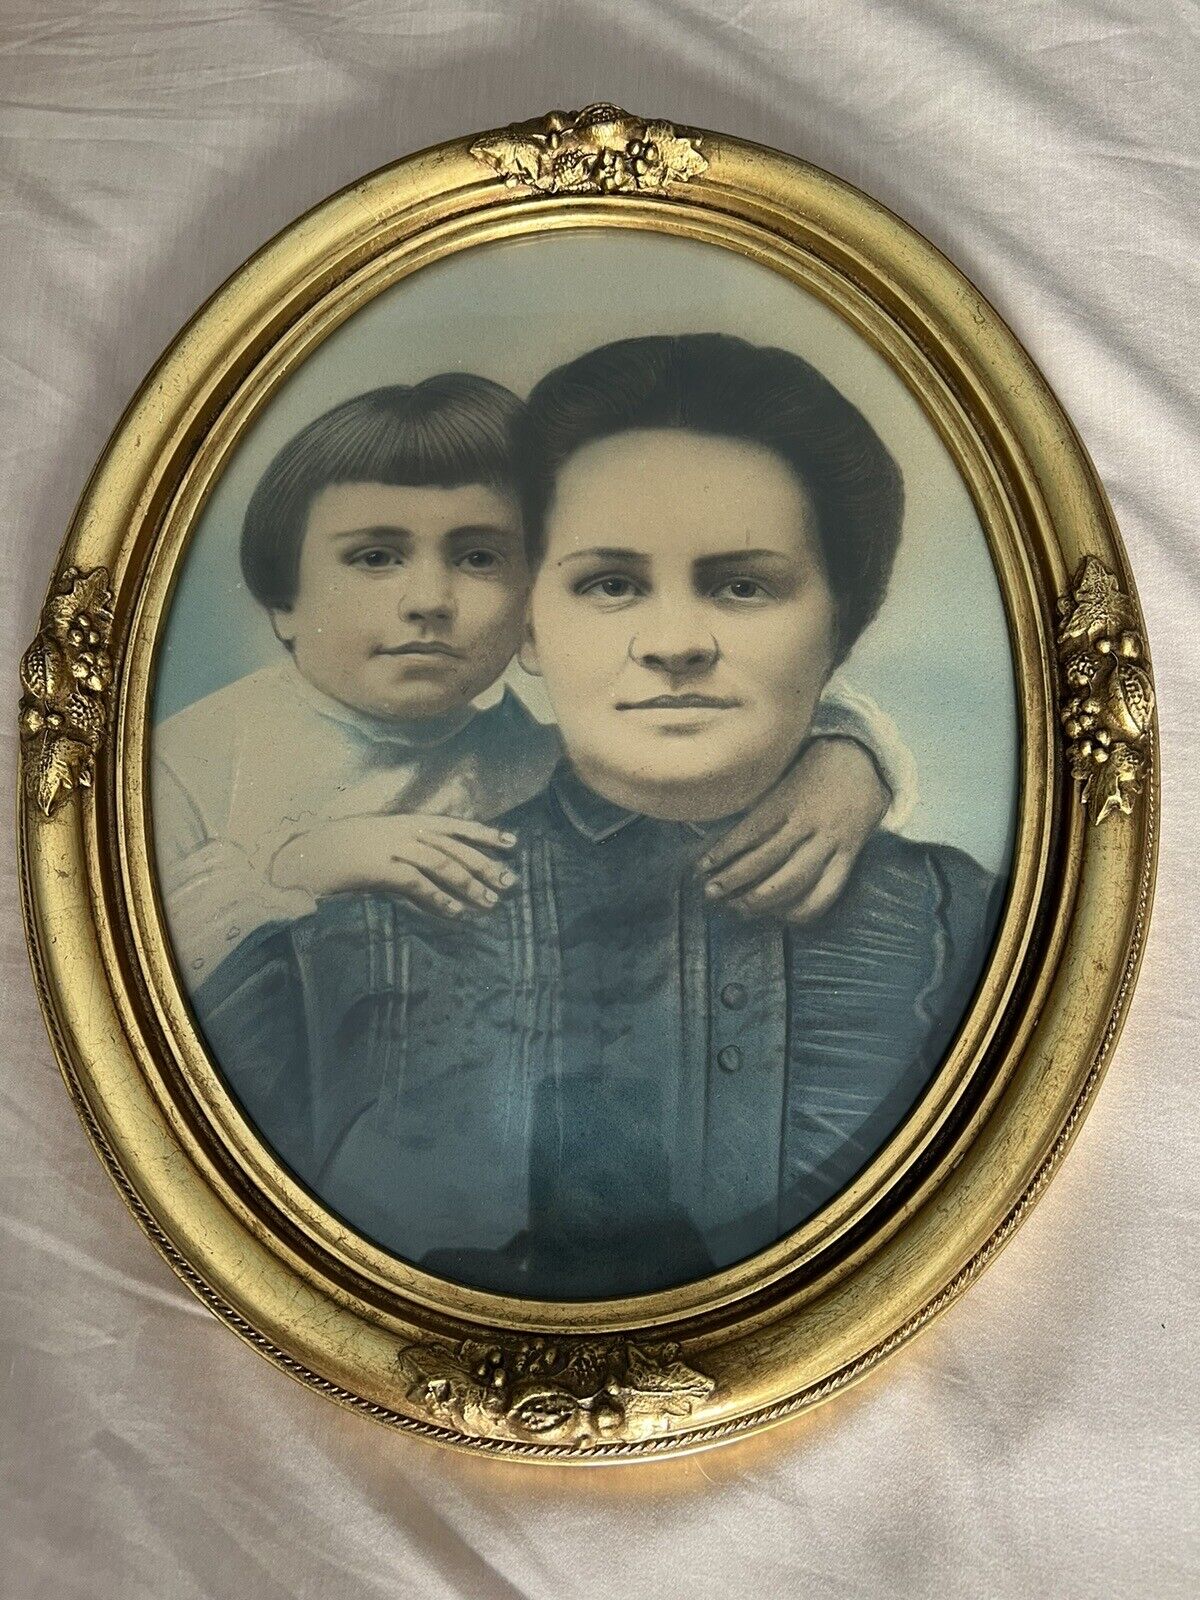 Antique Oval Portrait of Mother and Child Gold Frame 20th Century